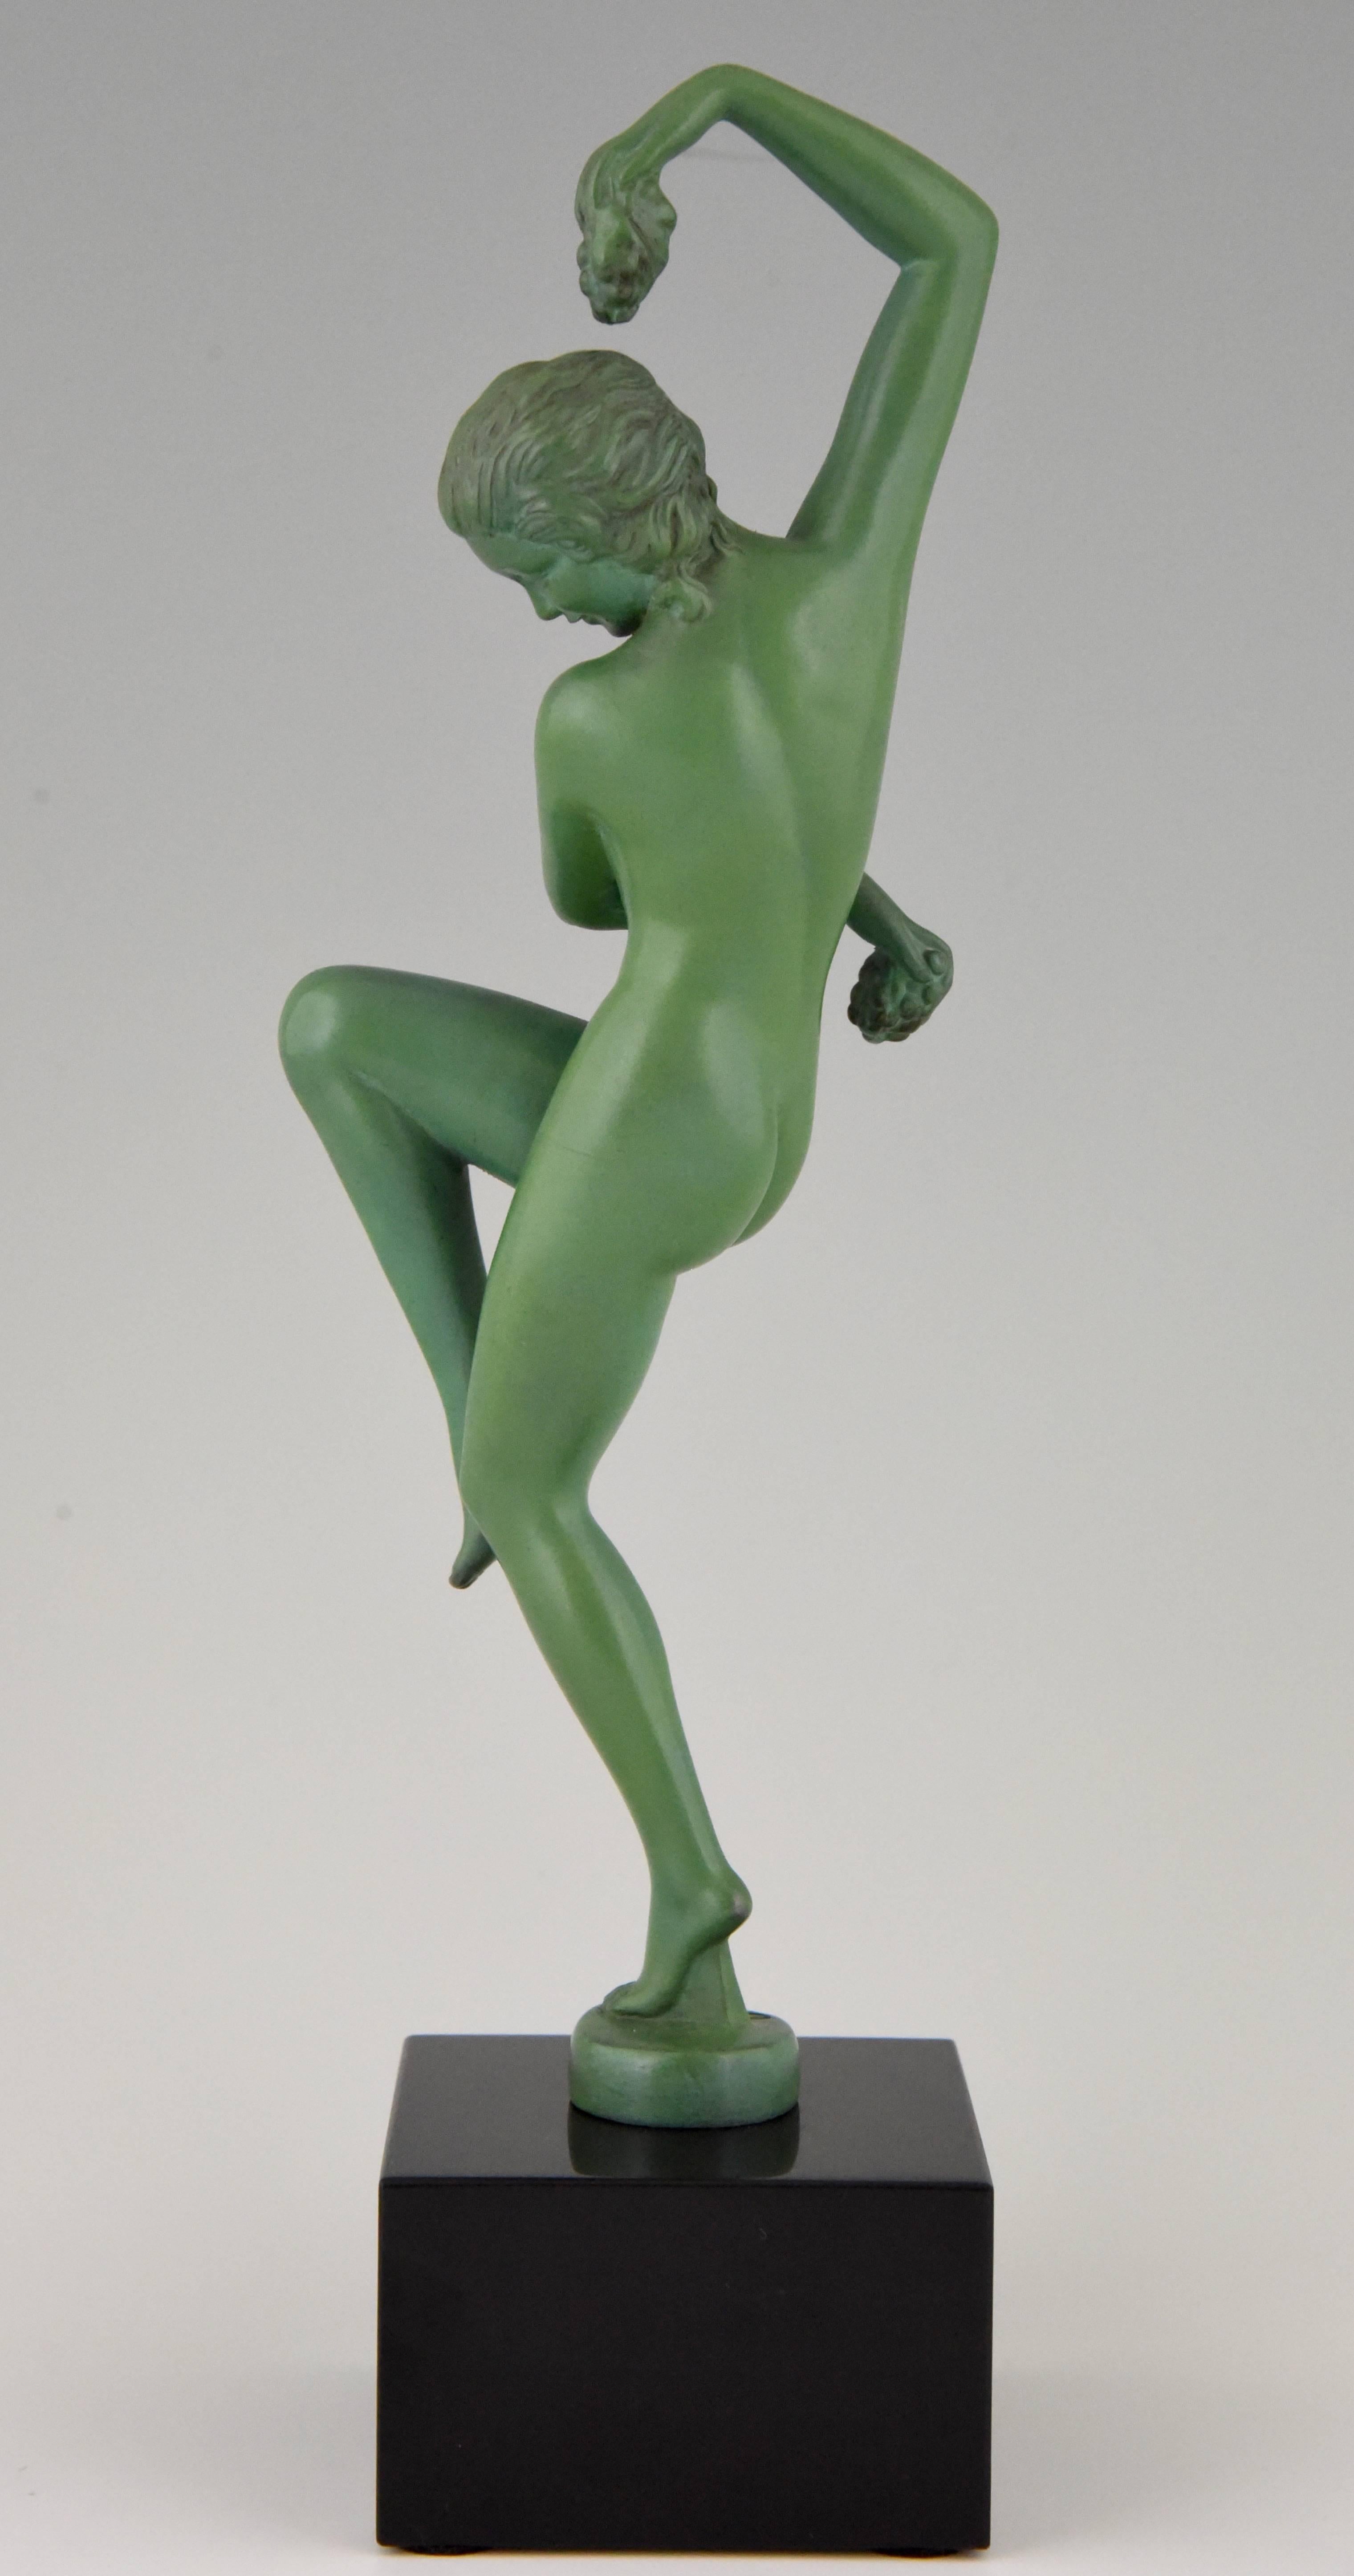 20th Century Art Deco Sculpture of a Nude Dancer with Grapes Denis, France, 1930